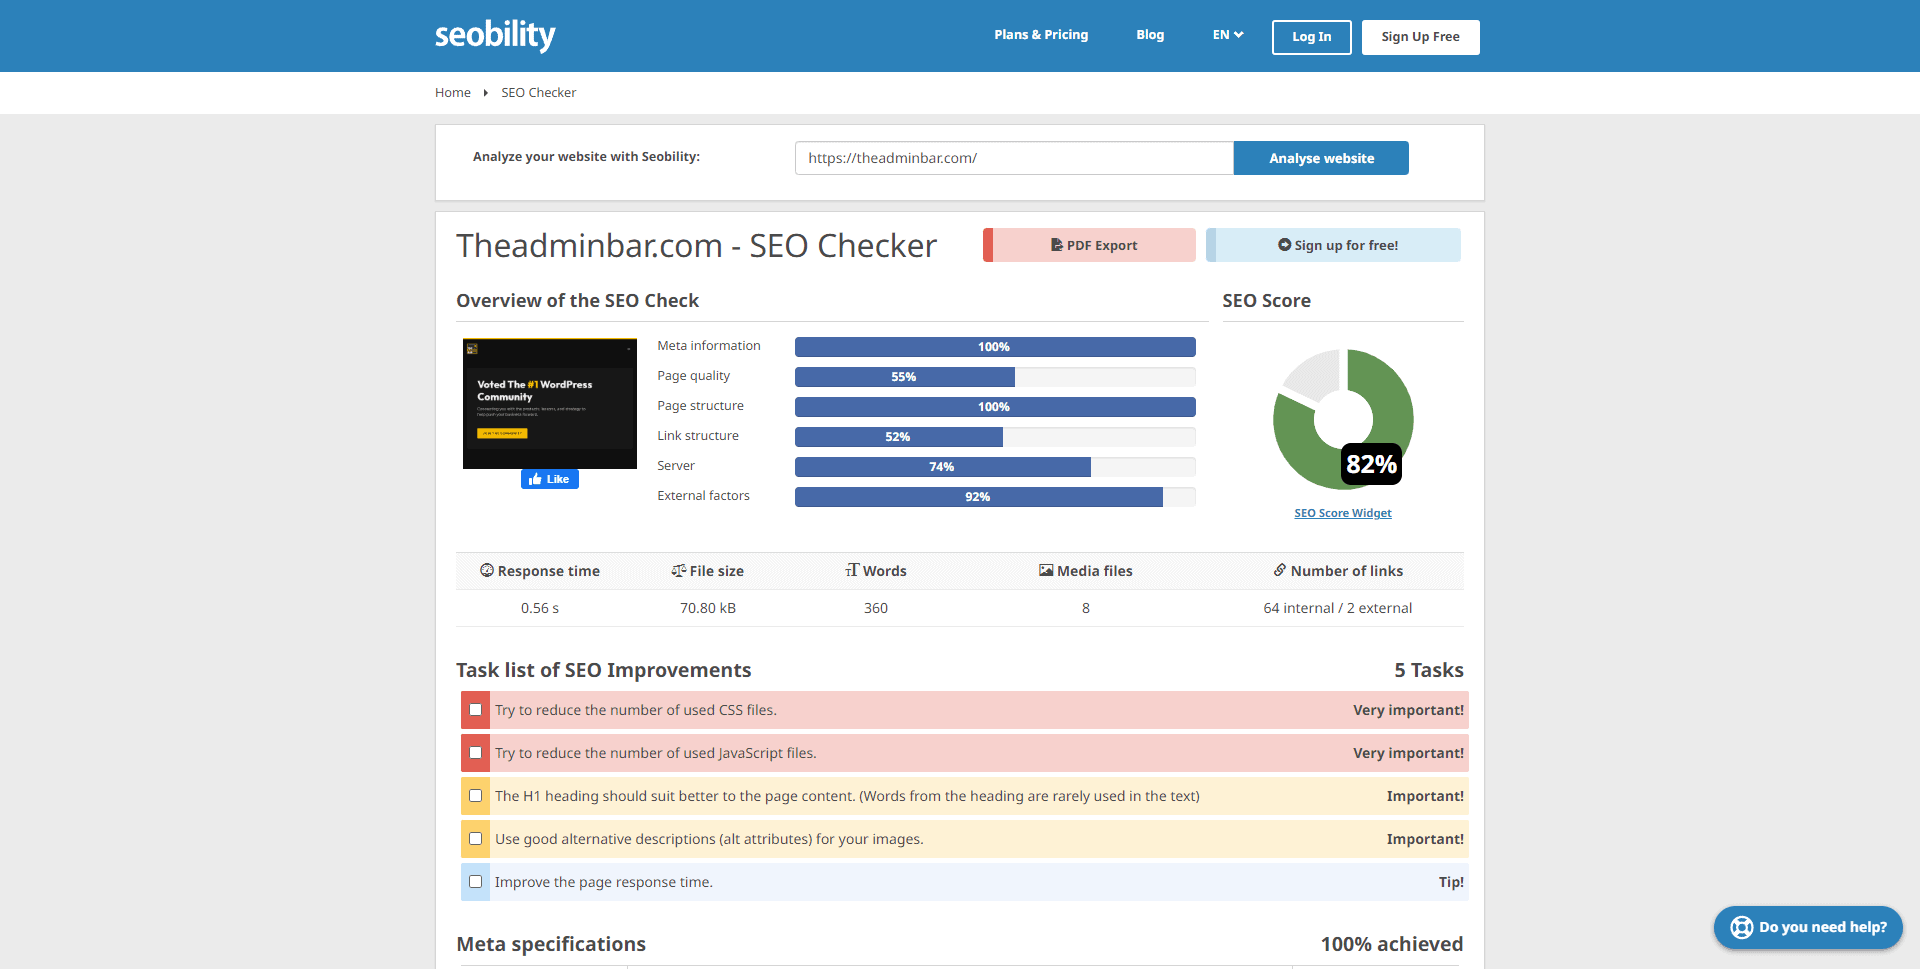 A screenshot of the SEObility test results